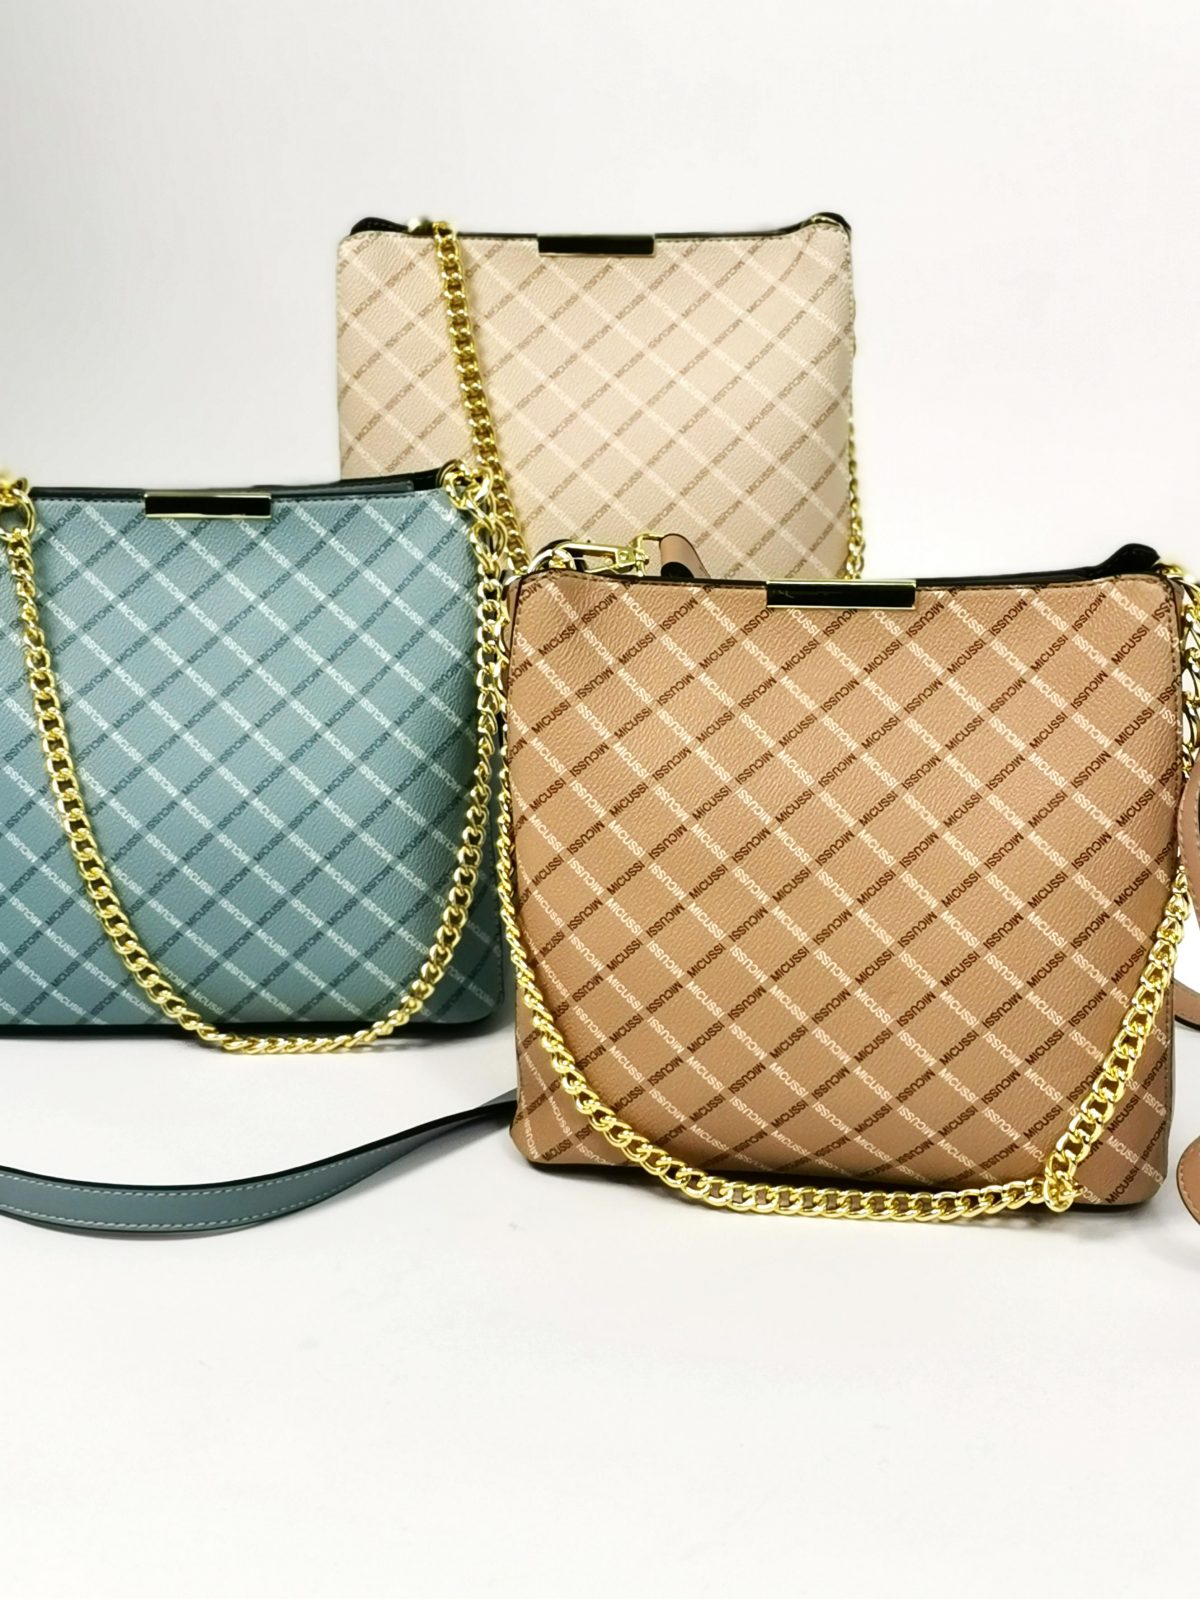 3 shoulder bags with gold chain in light blue, beige and off-white